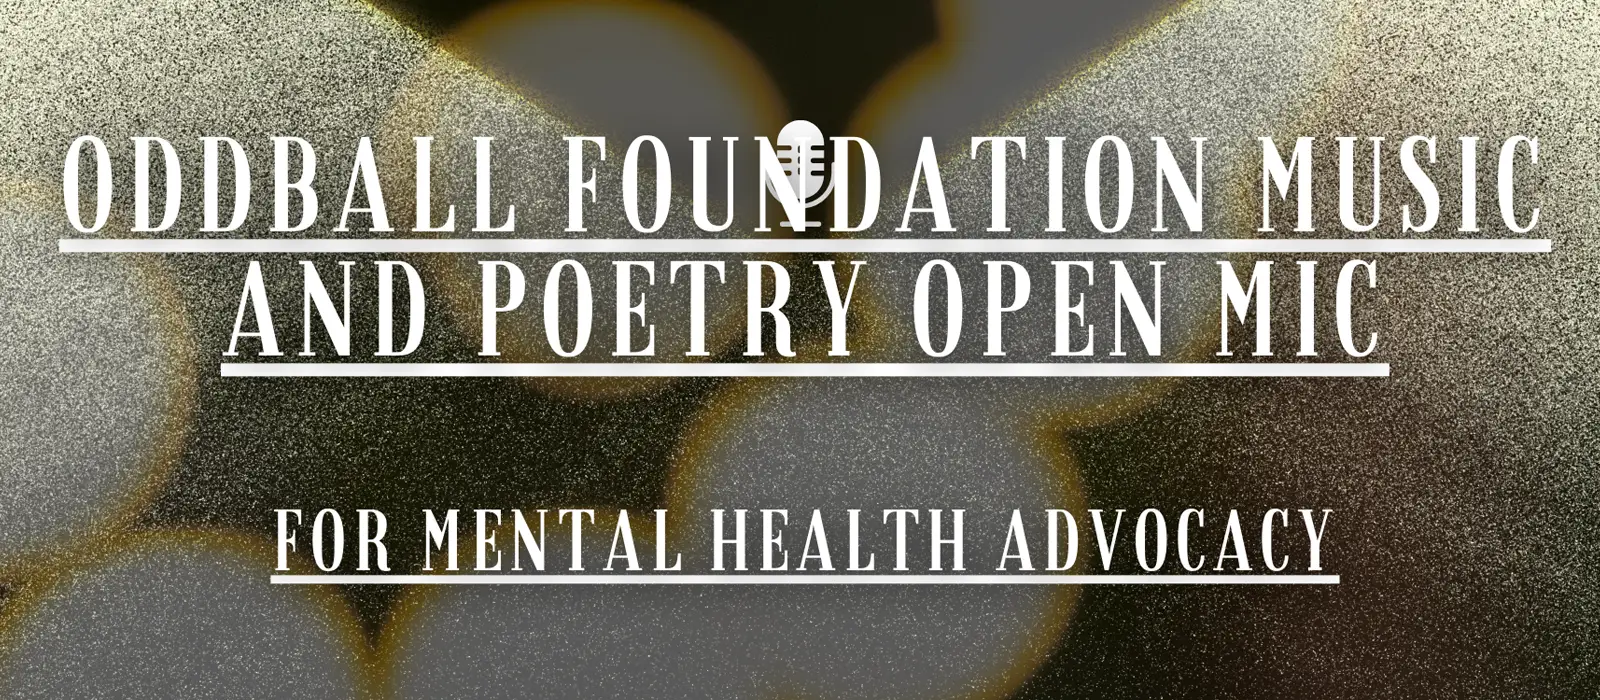 Oddball Foundation Music and Poetry Open Mic